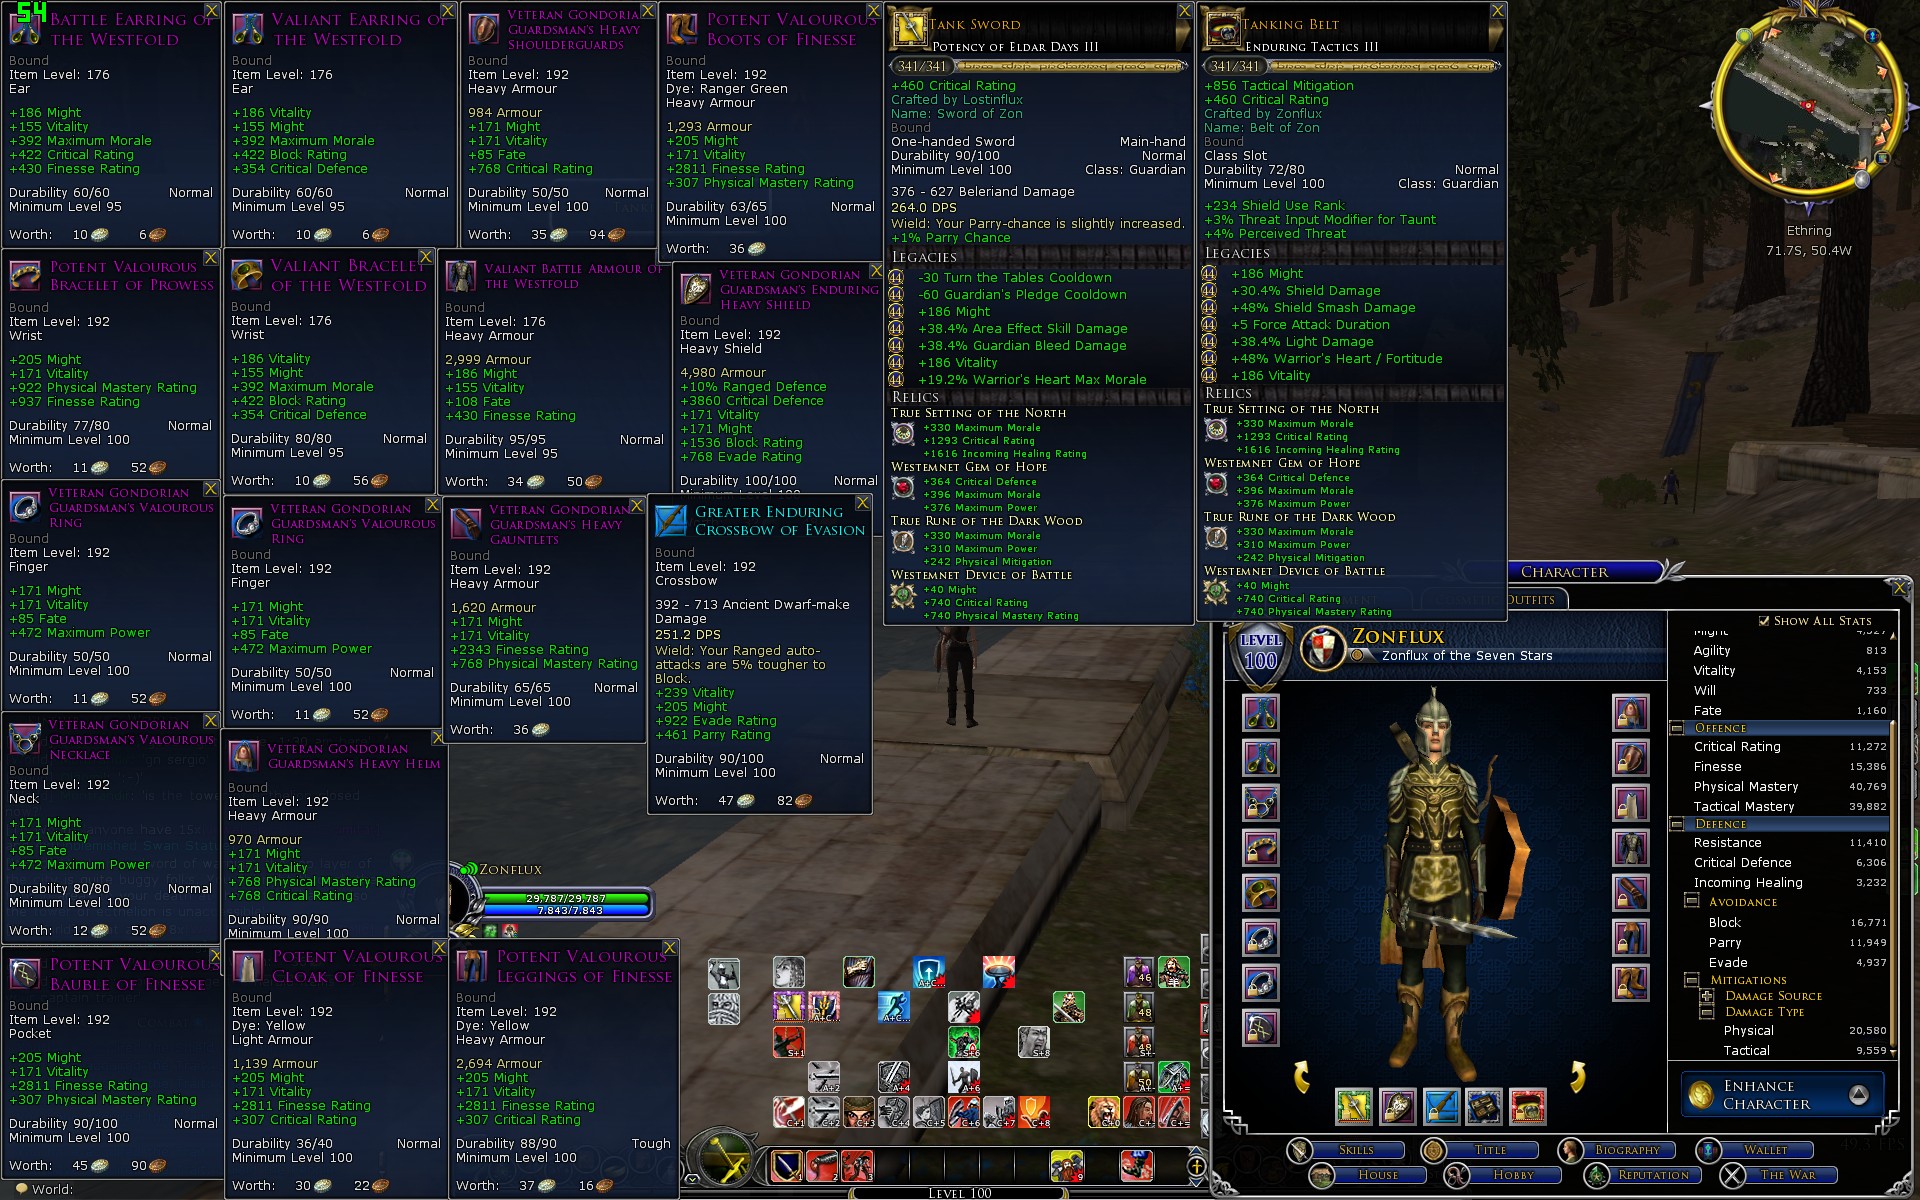 lotro leveling guide 1 100